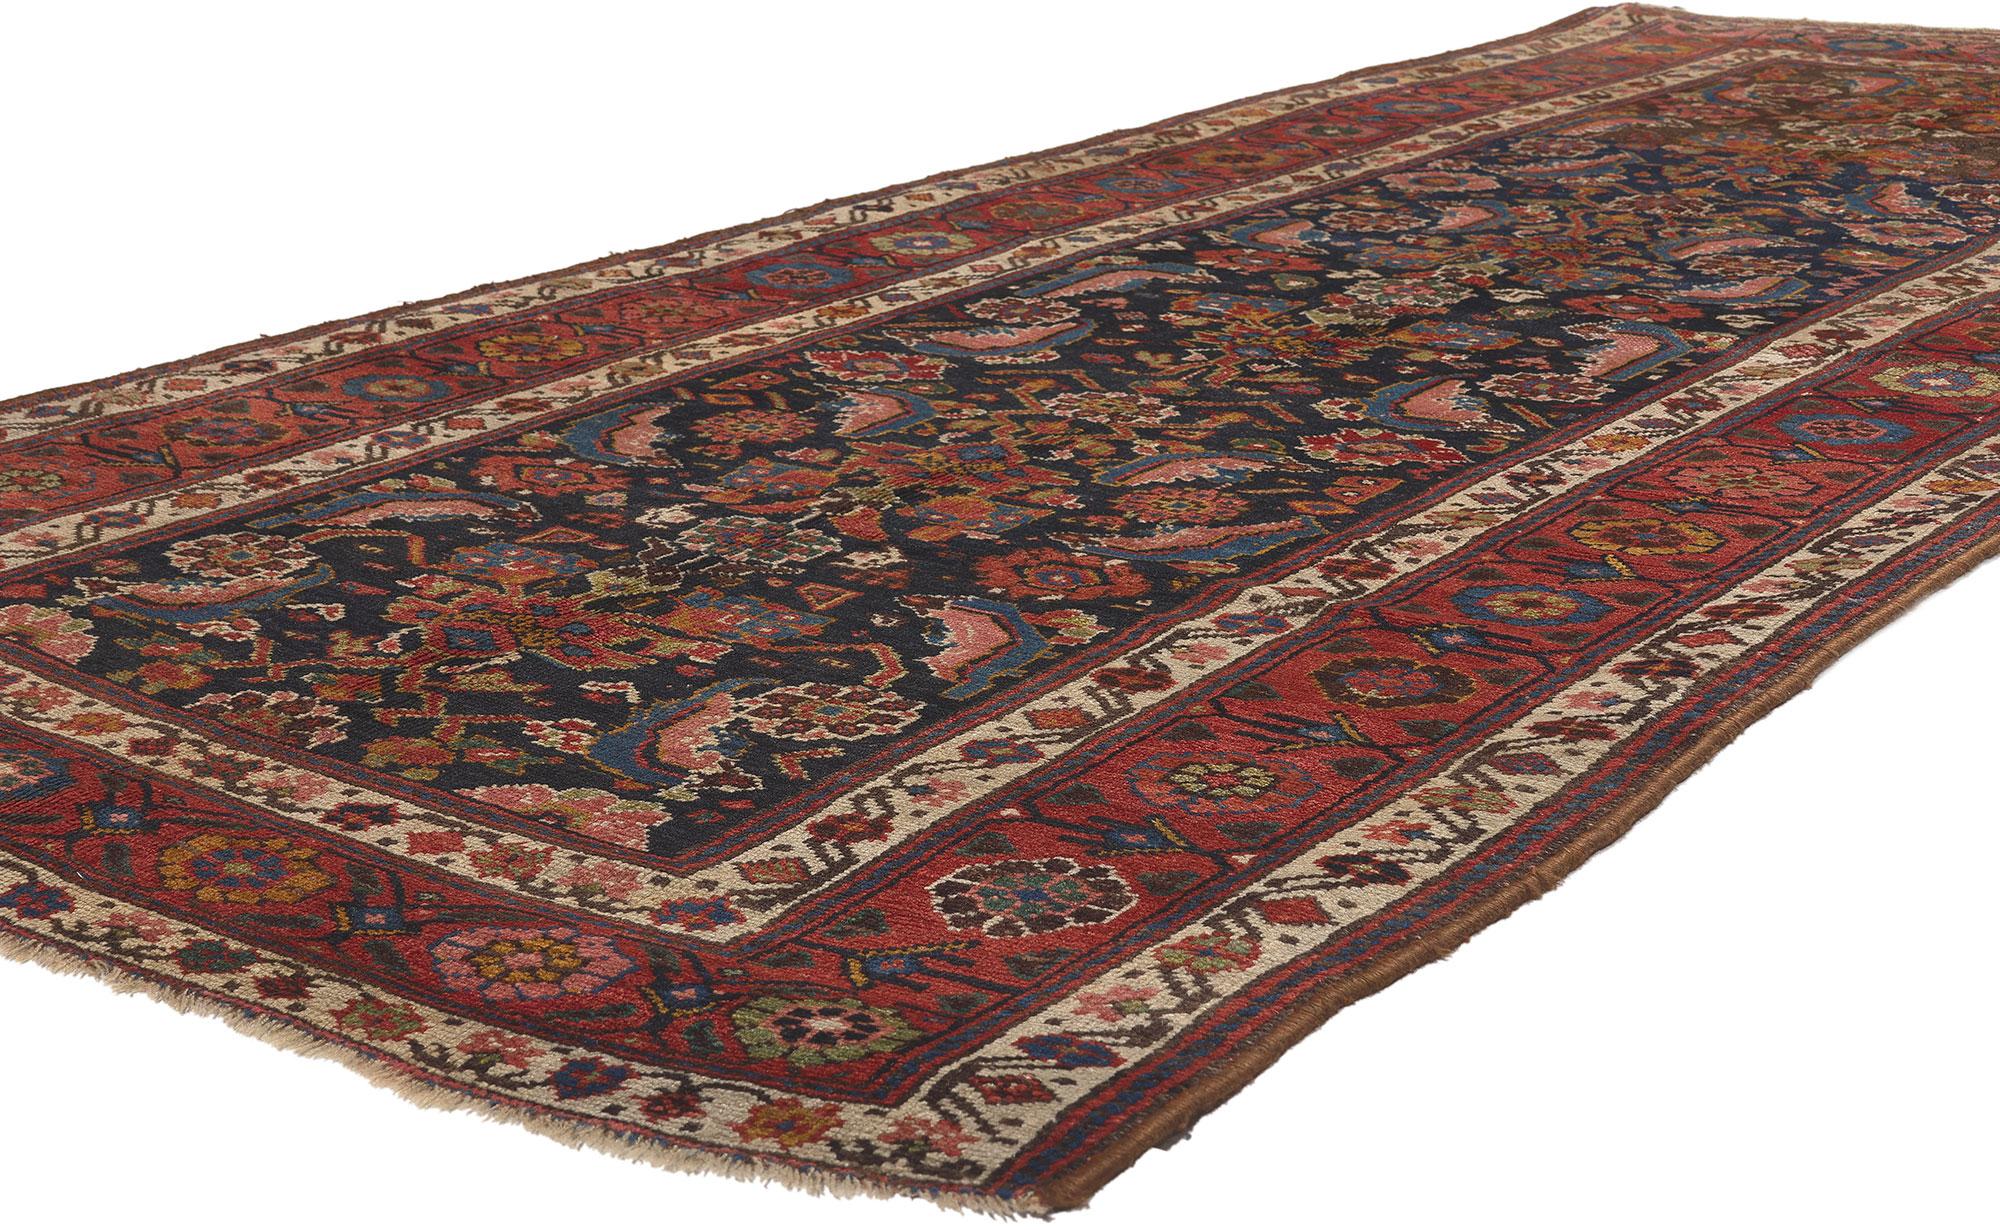 73304 Antique Persian Kurdish Rug, 04'05 x 10'00.
Artisanal excellence meets subtle sophistication in this antique Persian Kurdish rug. The intrinsic Herati design and earthy hues woven into this piece work together creating a curated live-in look.